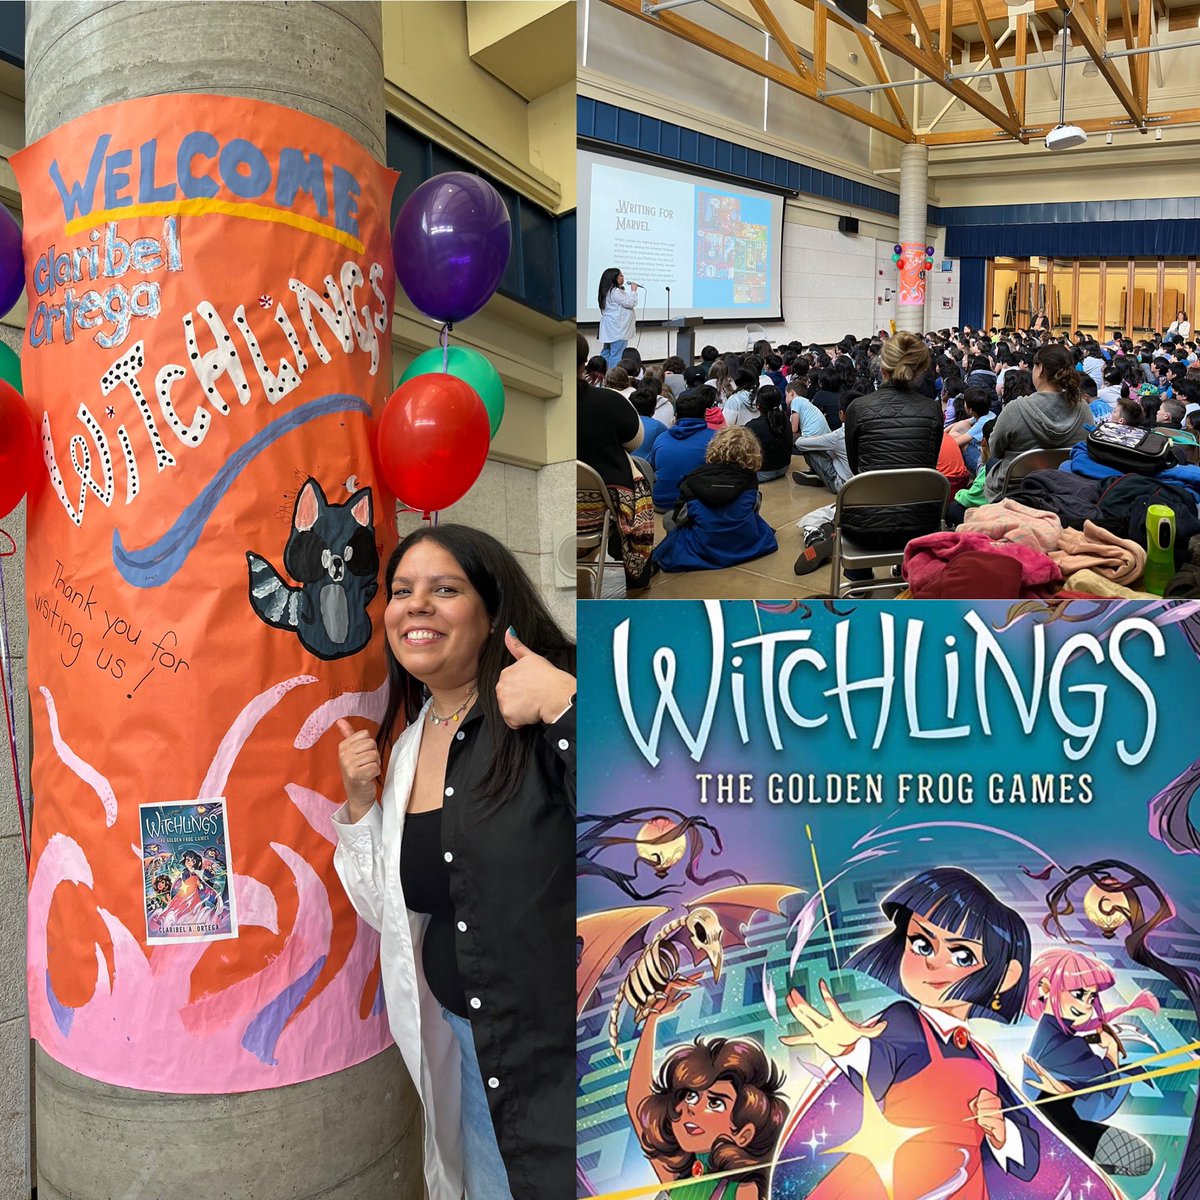 Thank you, Graystone Elementary School, for such a warm WITCHLINGS welcome today for Claribel Ortega! @Scholastic  @Claribel_Ortega @Hicklebees